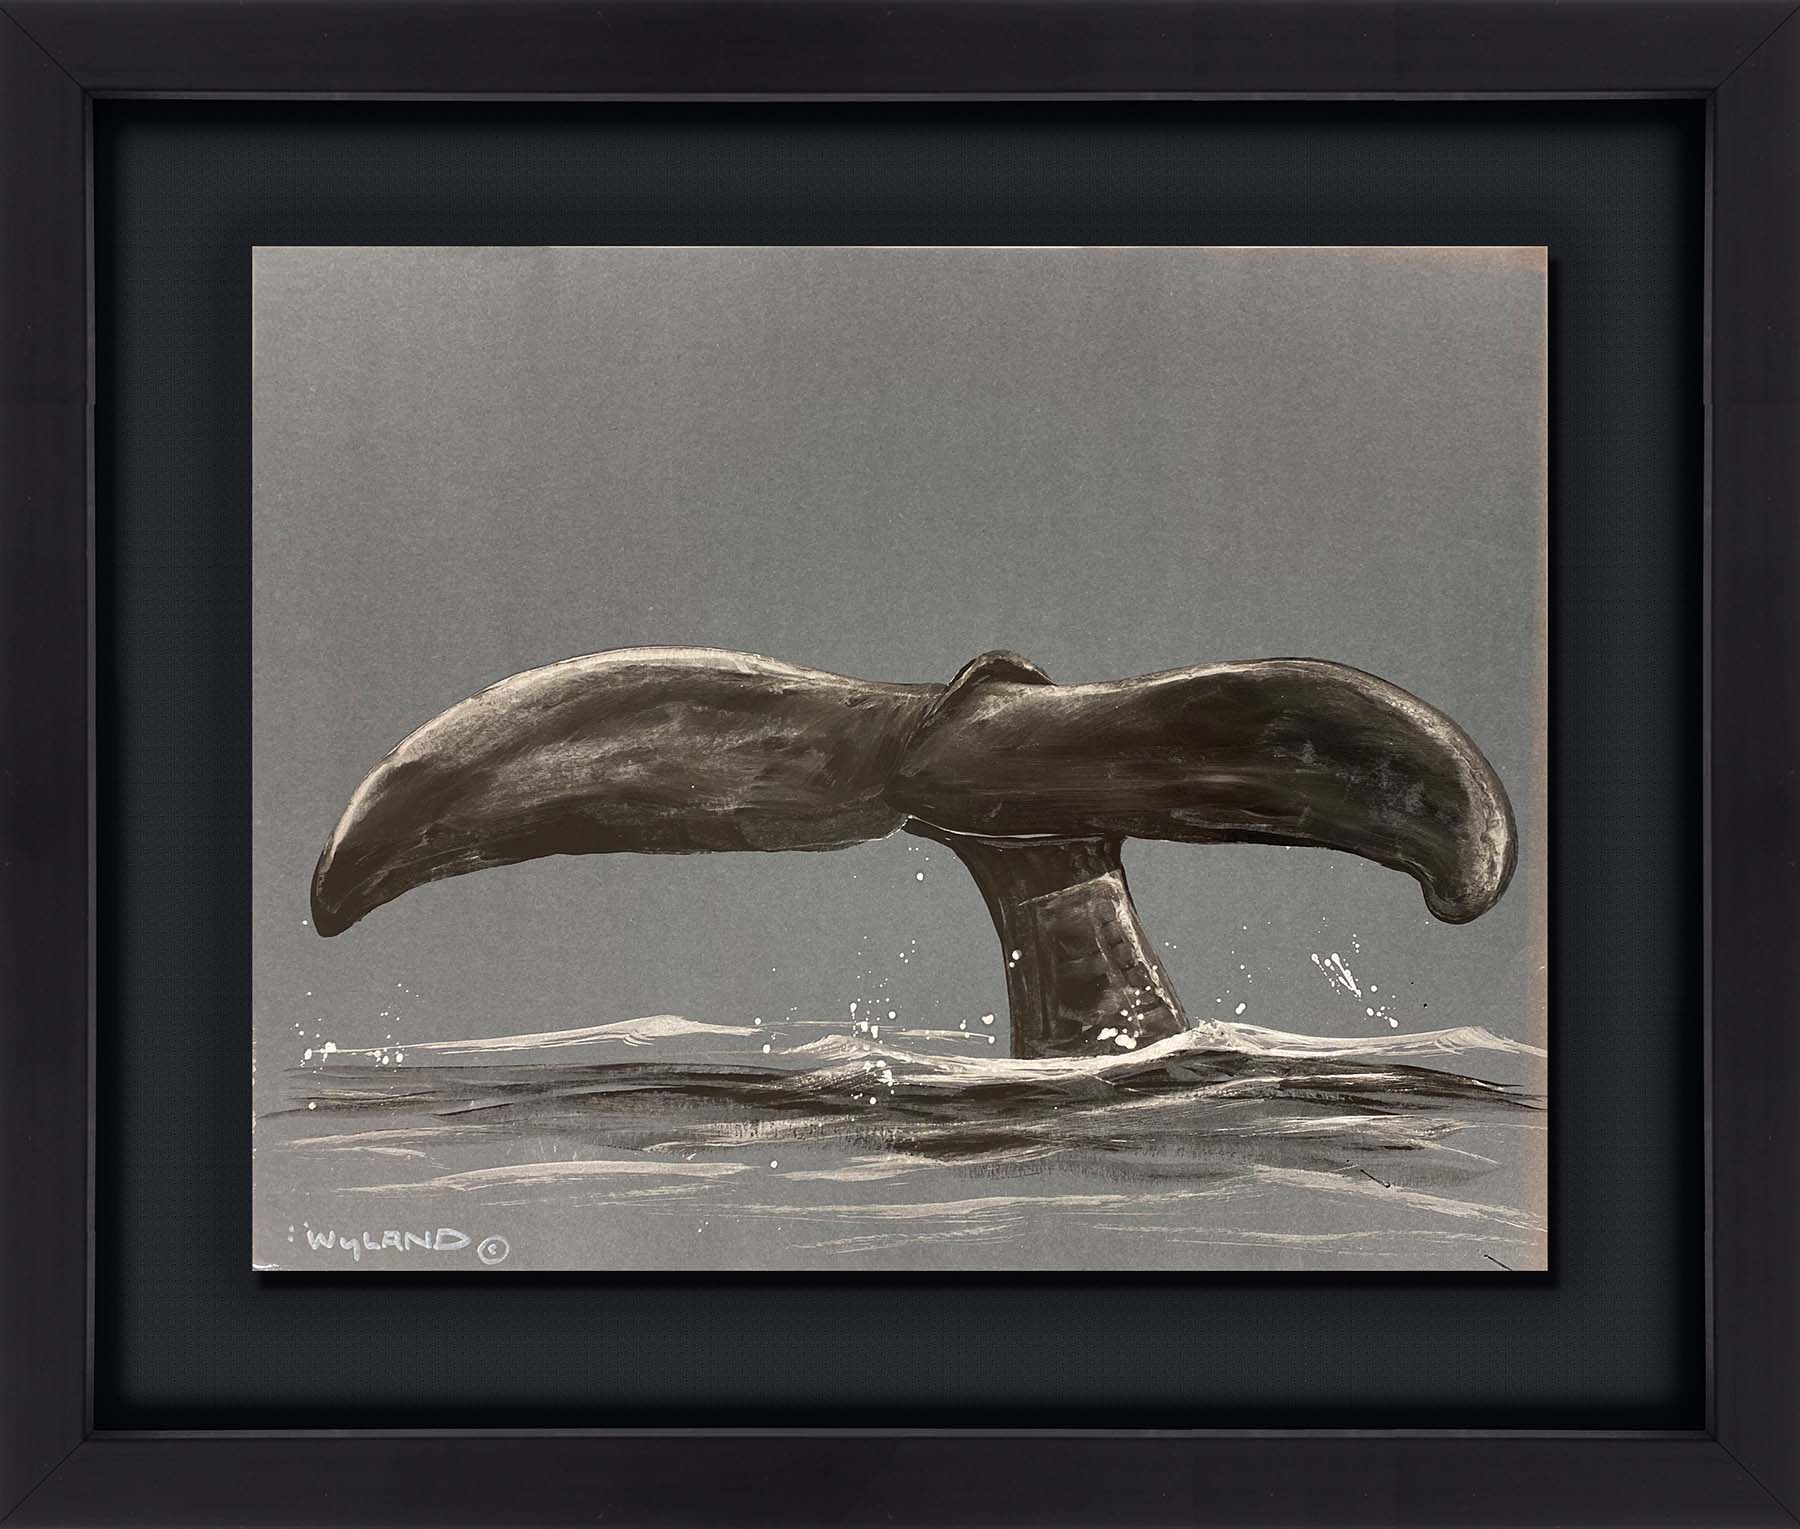 flukes of whale paintings